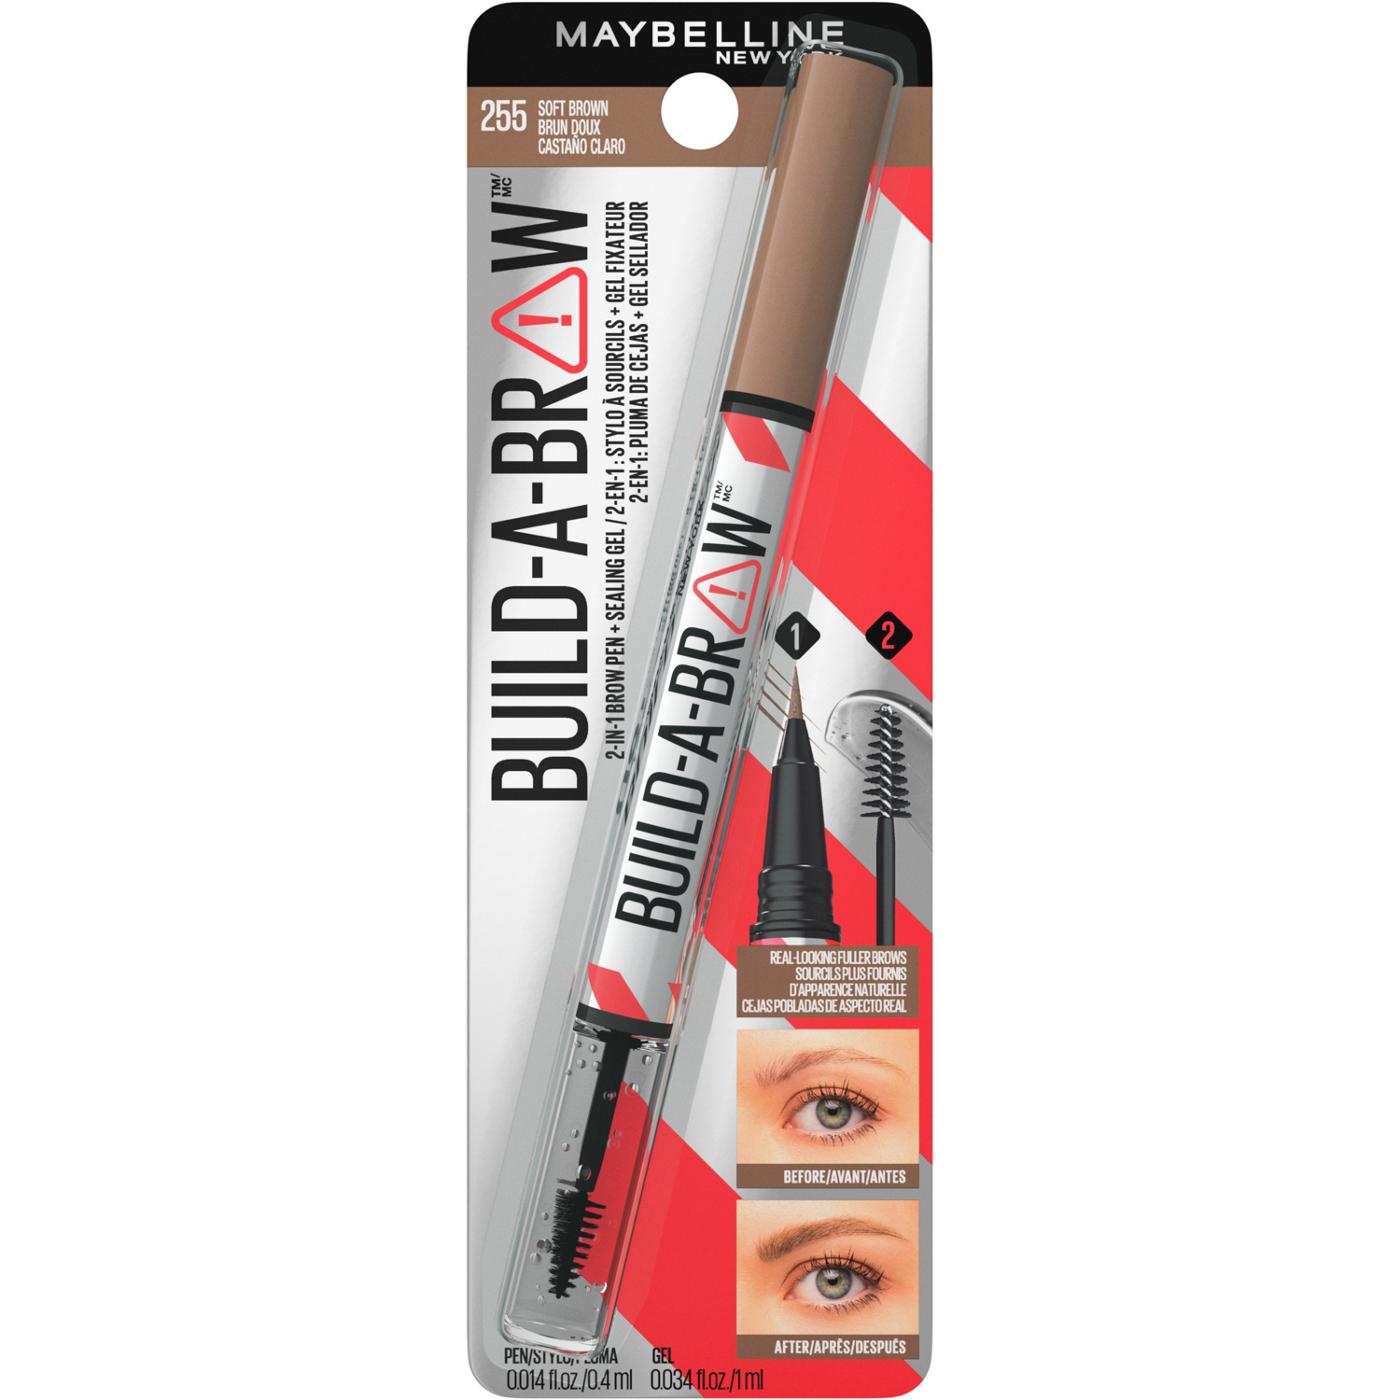 Maybelline Build A Brow 2 In 1 Brow Pen - Soft Brown; image 13 of 16